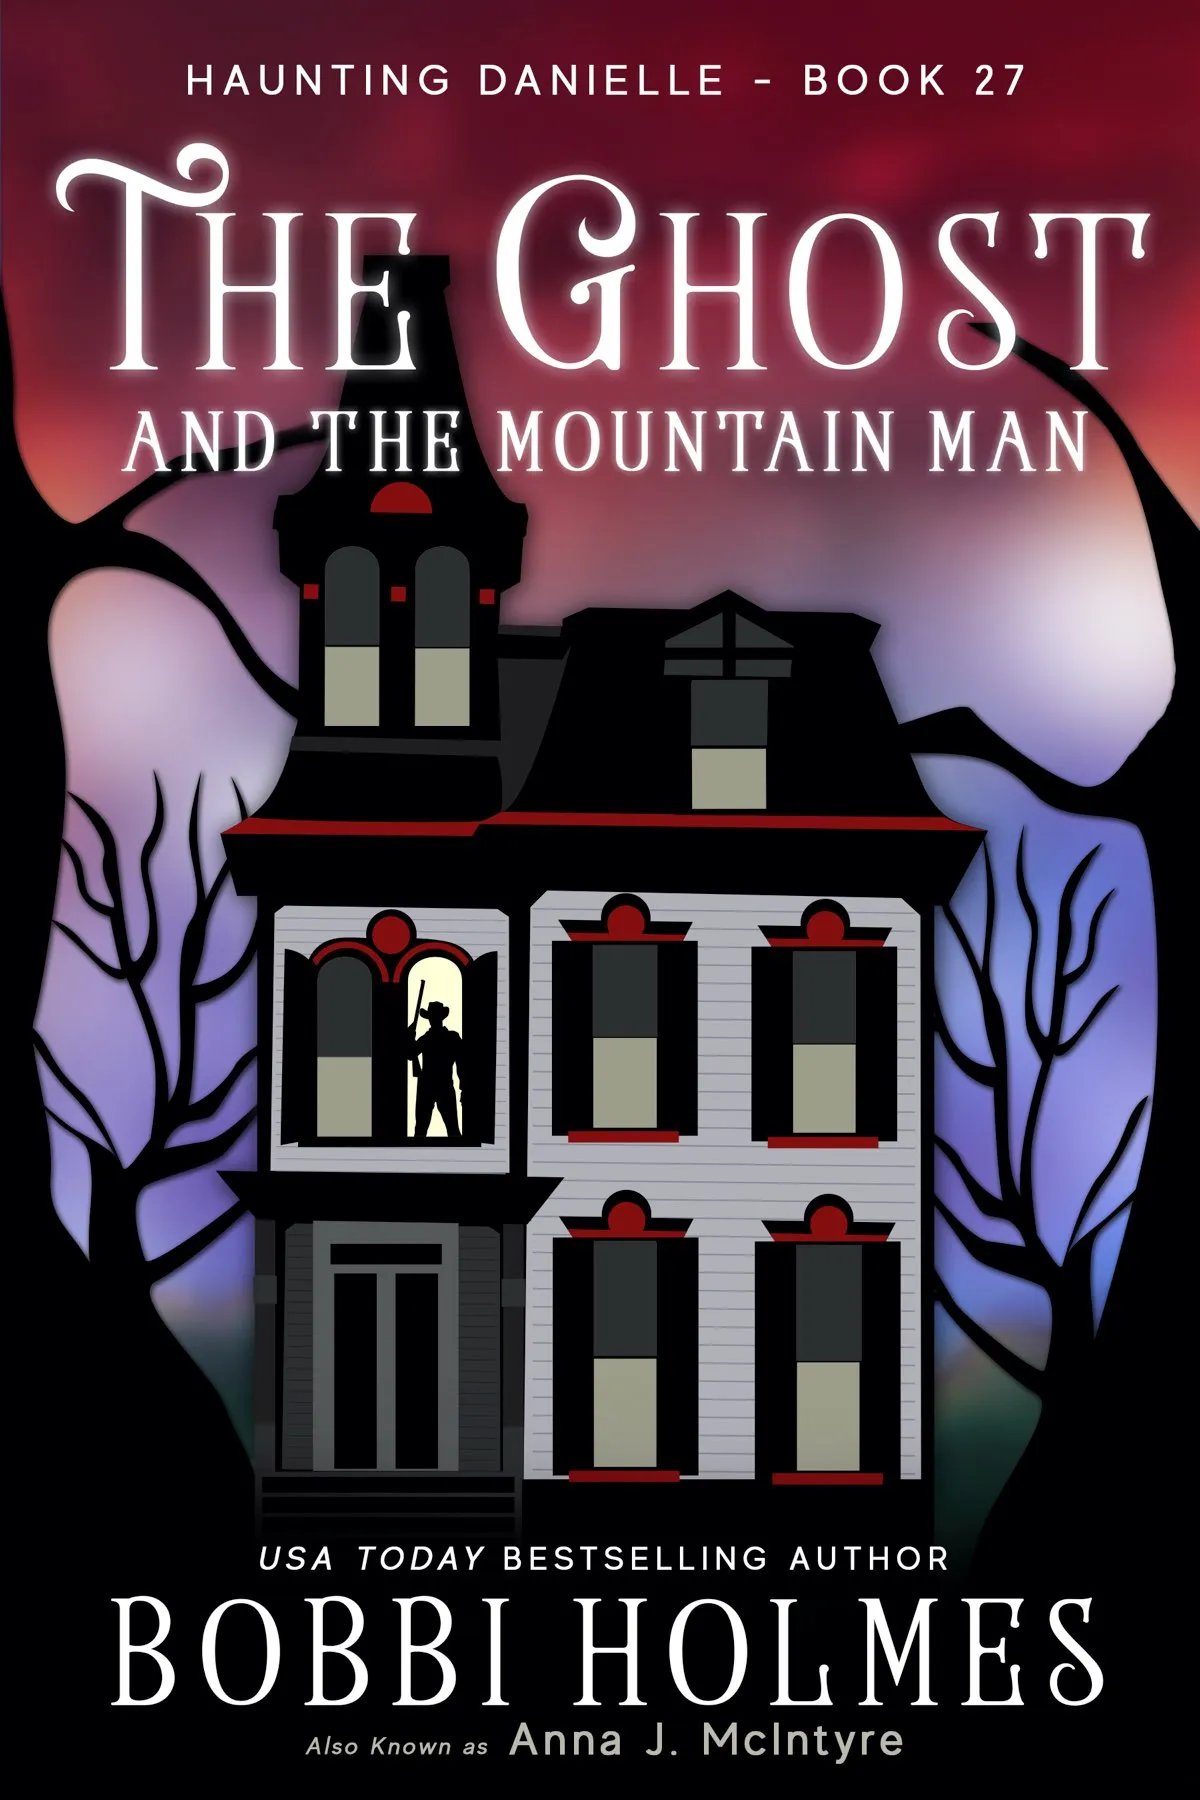 The Ghost and the Mountain Man (Haunting Danielle #27)